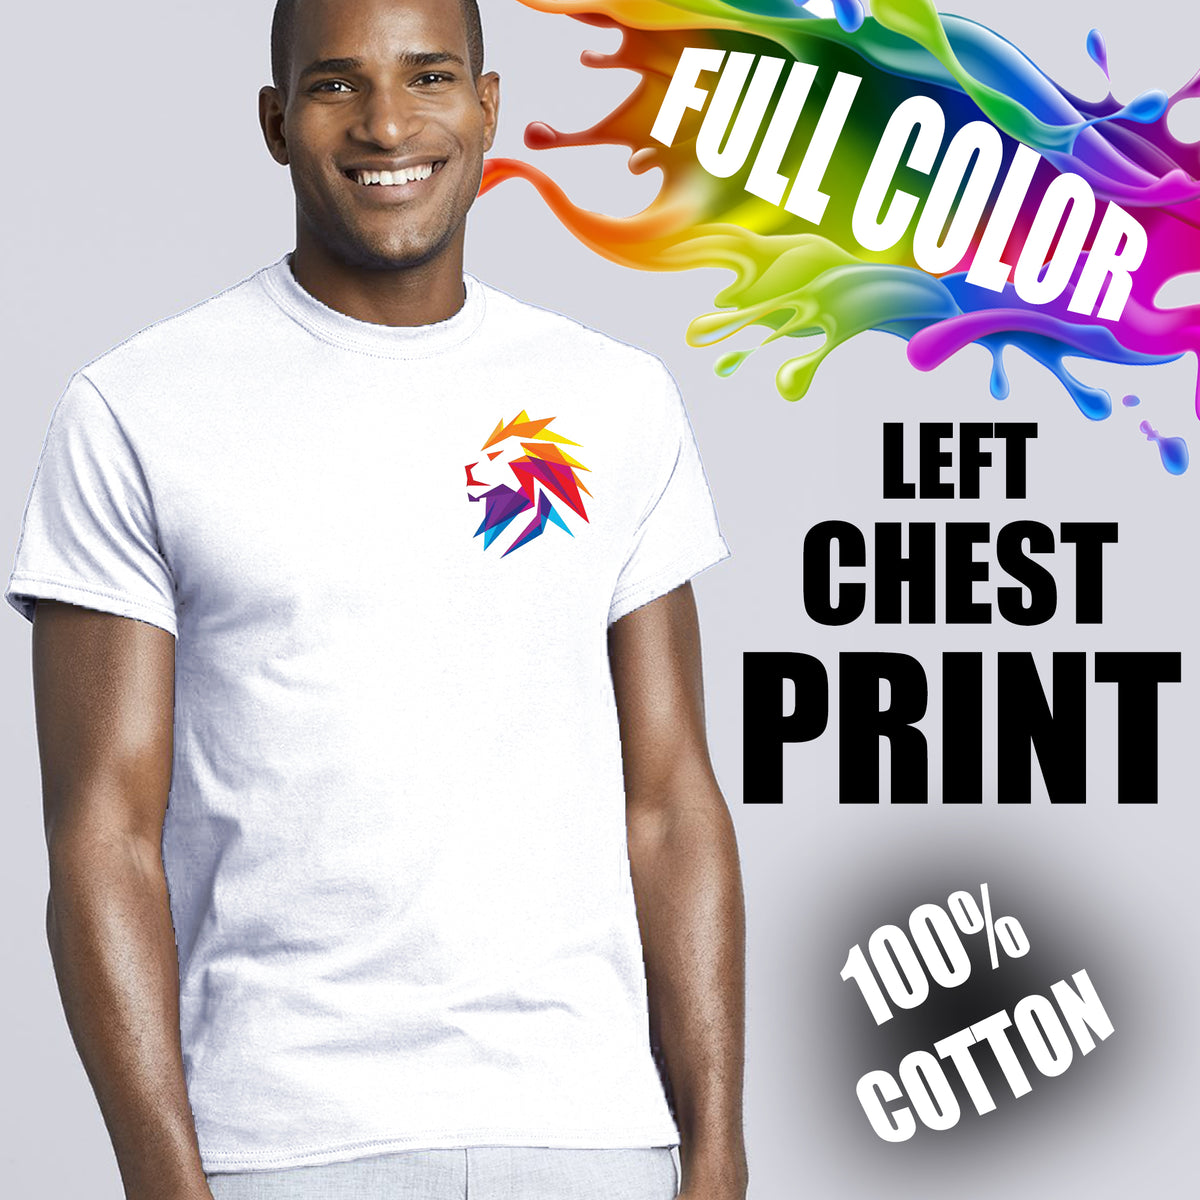 Full Color Left Chest Apparel Printing– Millionaire Grind